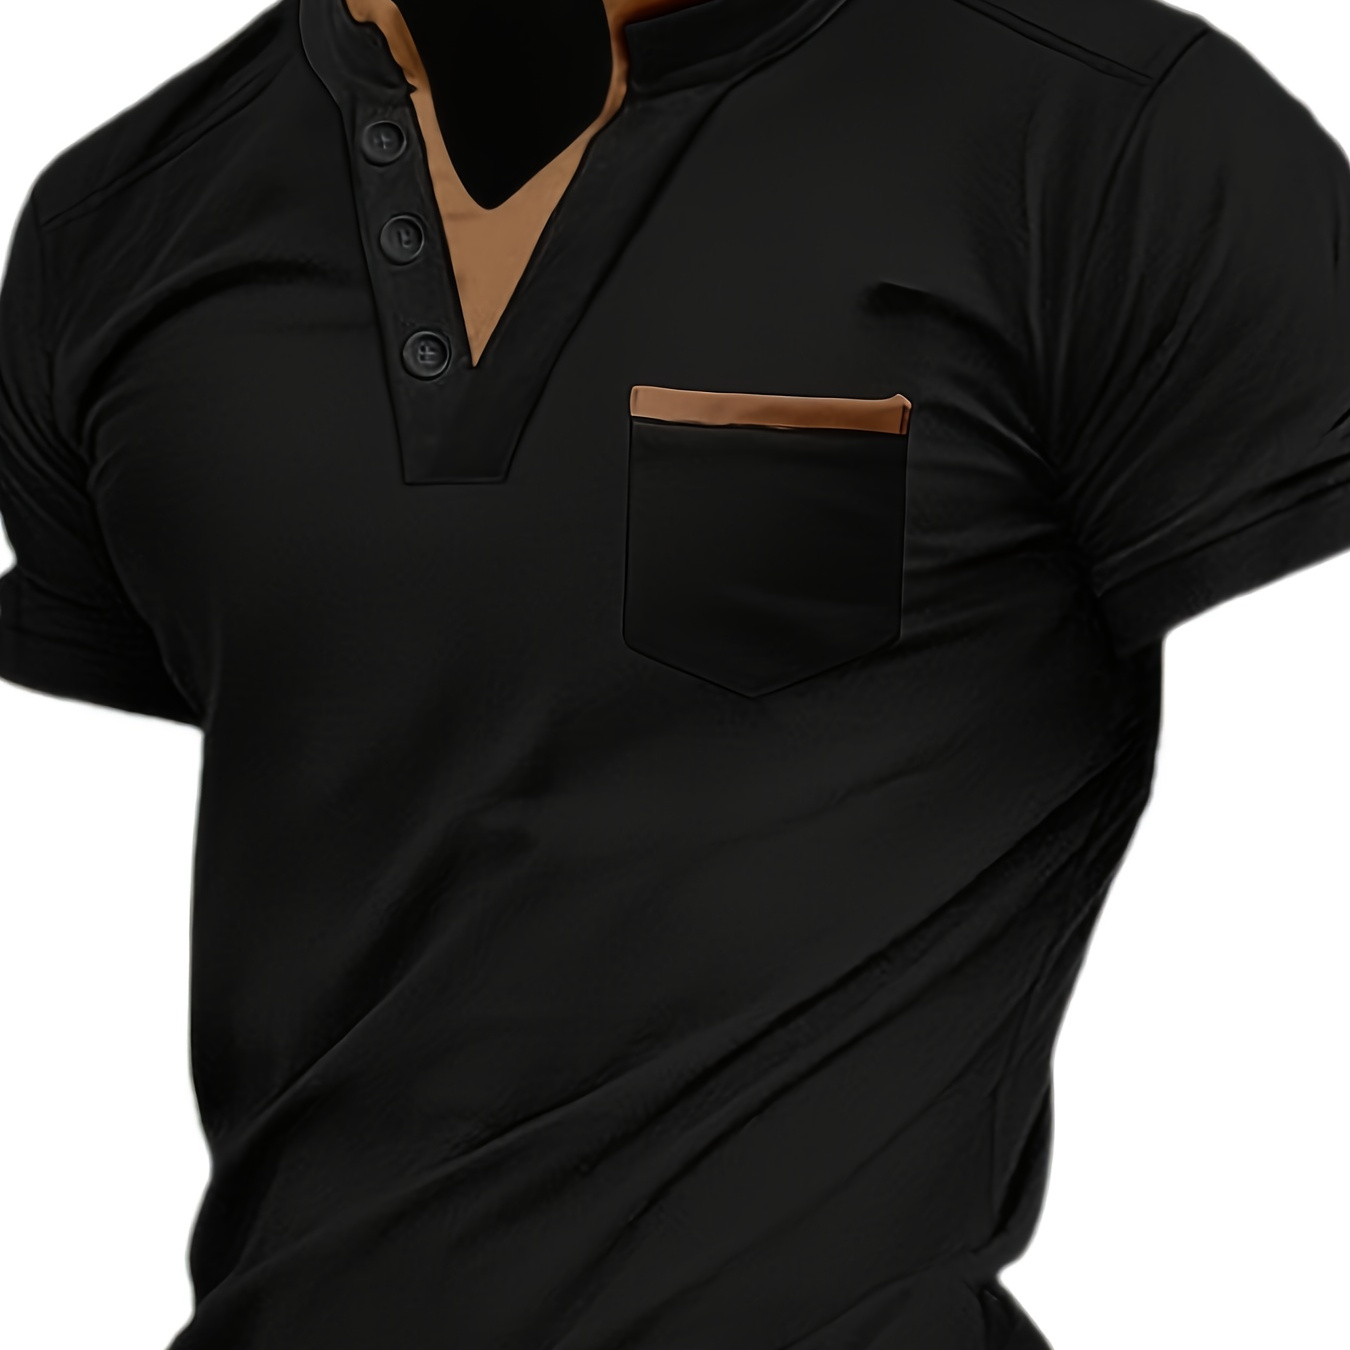 

Plus Size Men's Business Casual Henley Shirt For Summer